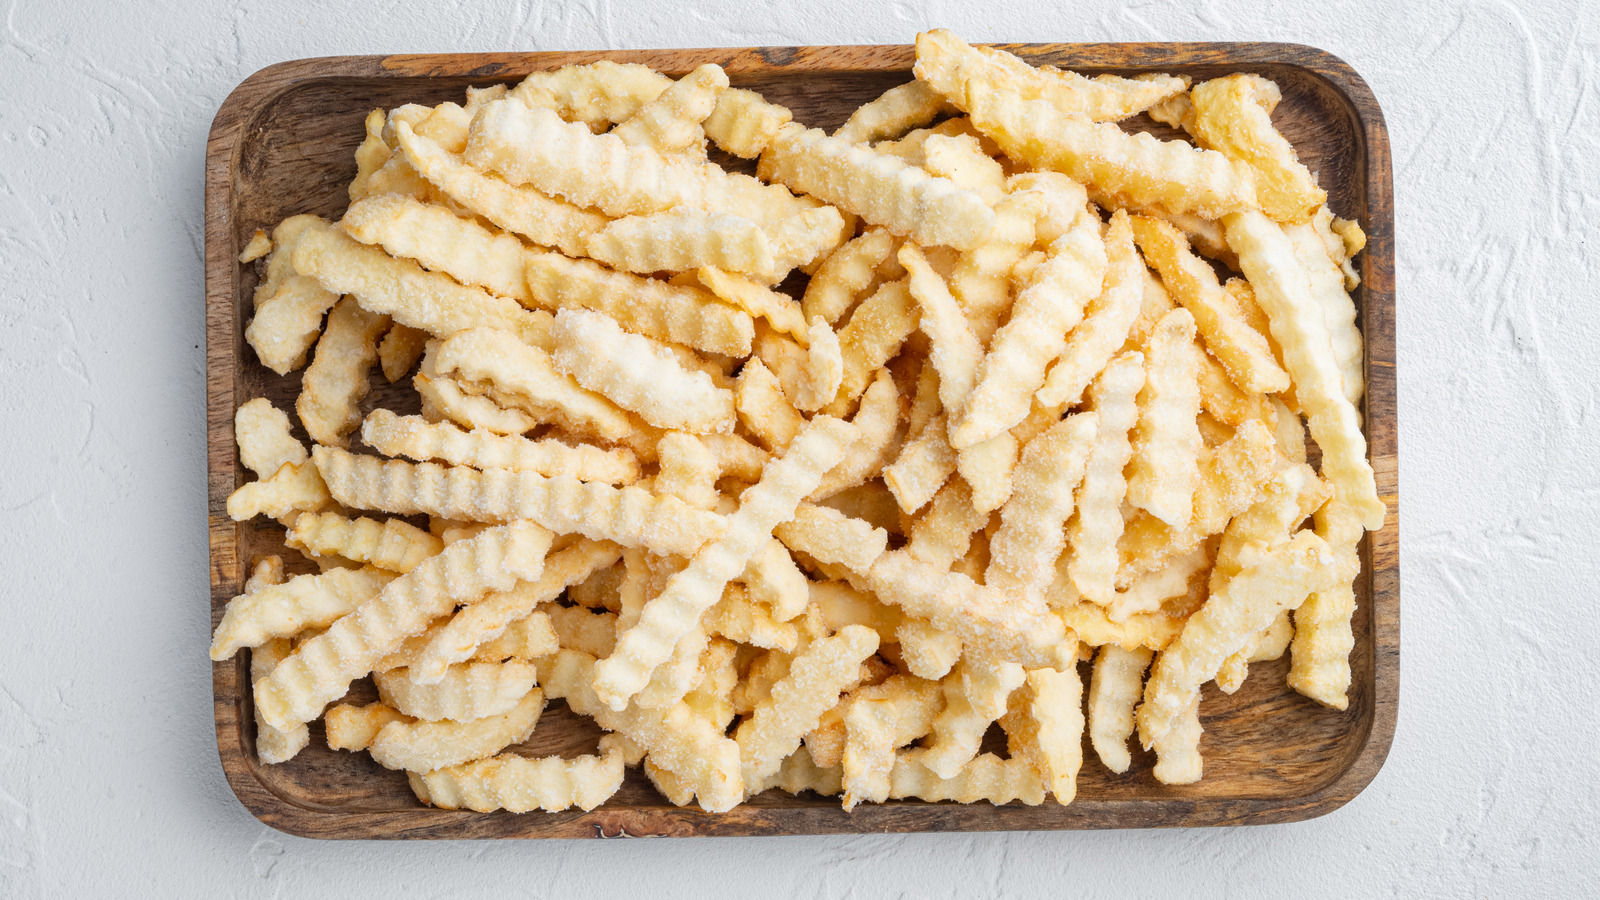 Frozen French Fries in Air Fryer - Home. Made. Interest.